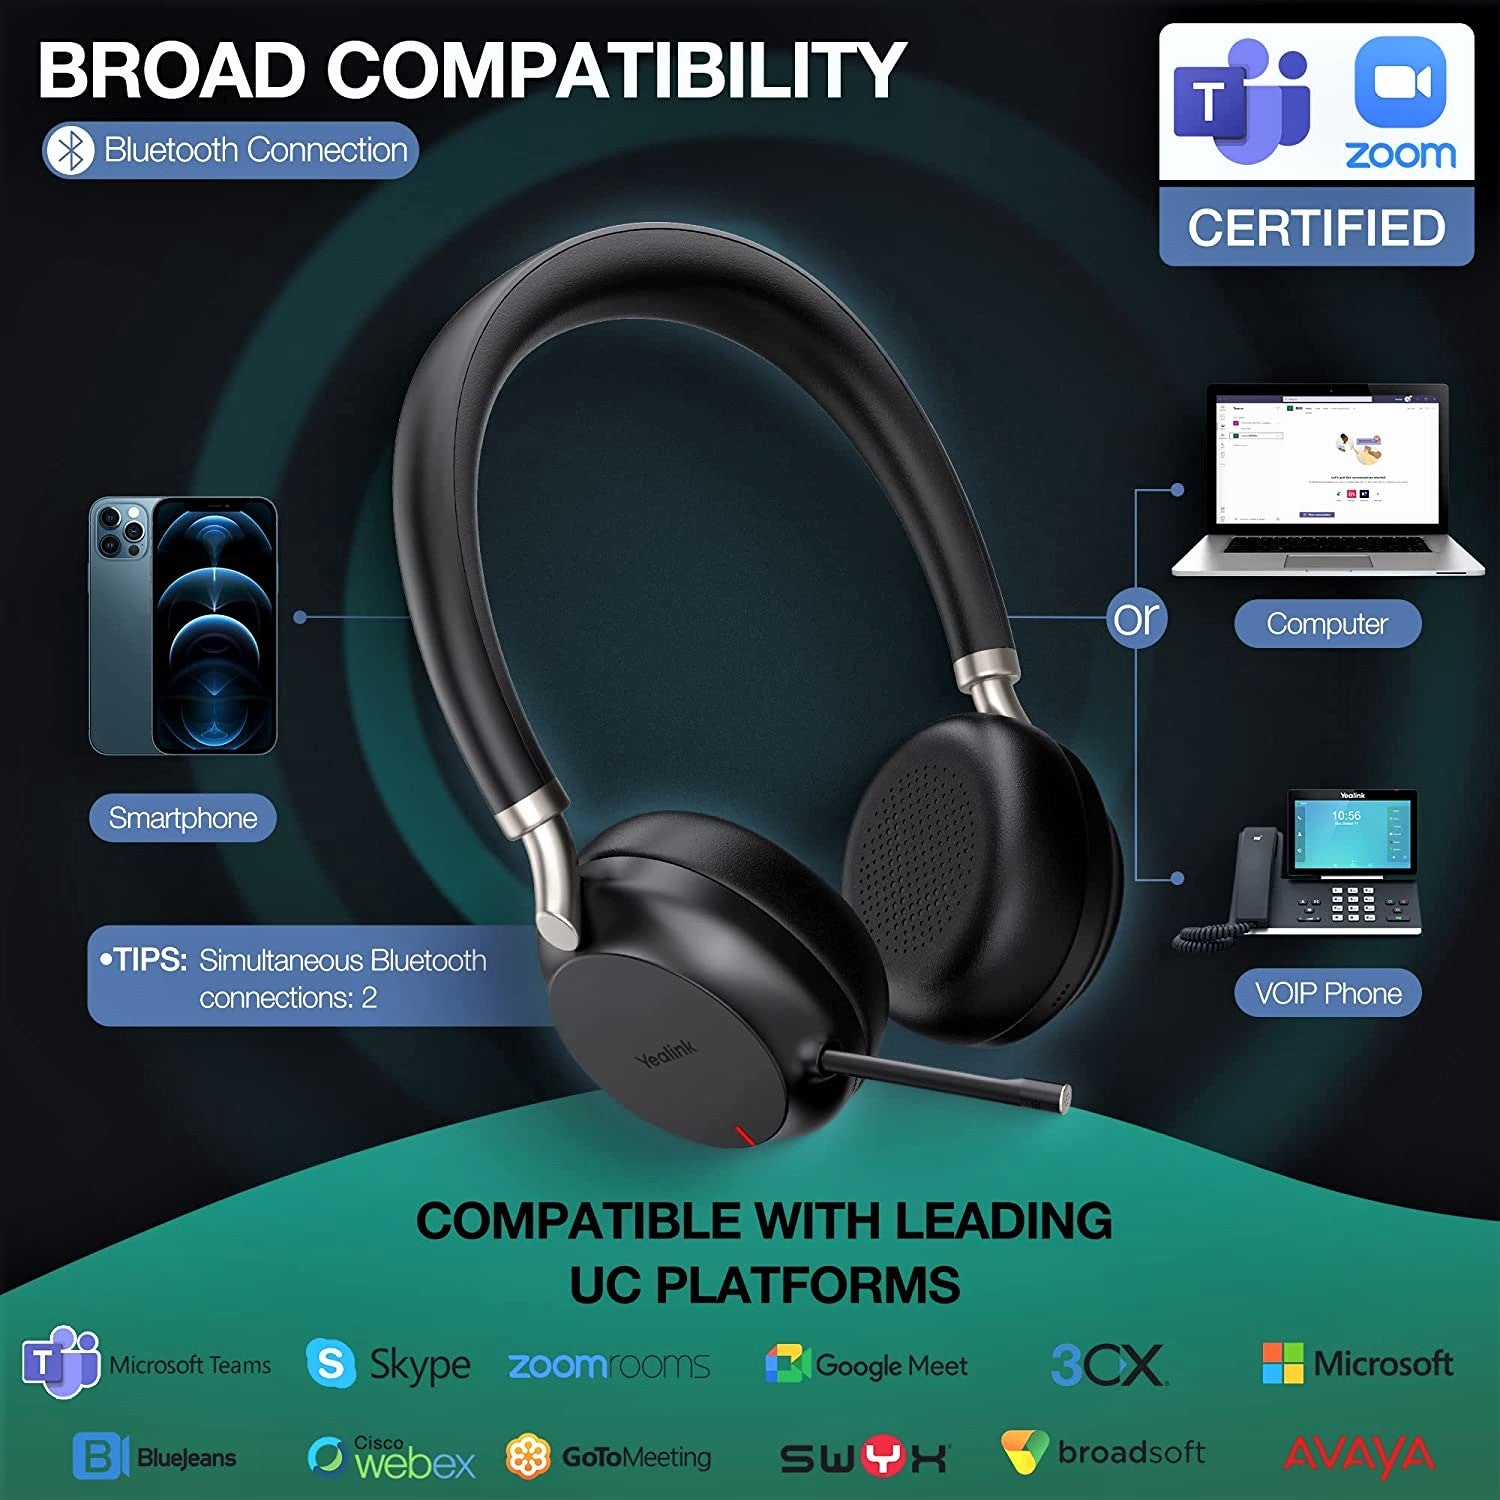 Yealink BH72 lite Bluetooth Headset Wireless Headset with Microphone Teams Zoom Certified Headset Office Headphone Stereo Noise Canceling Mic, Retractable Hidden Microphone Arm, 35H Talk Time, Black